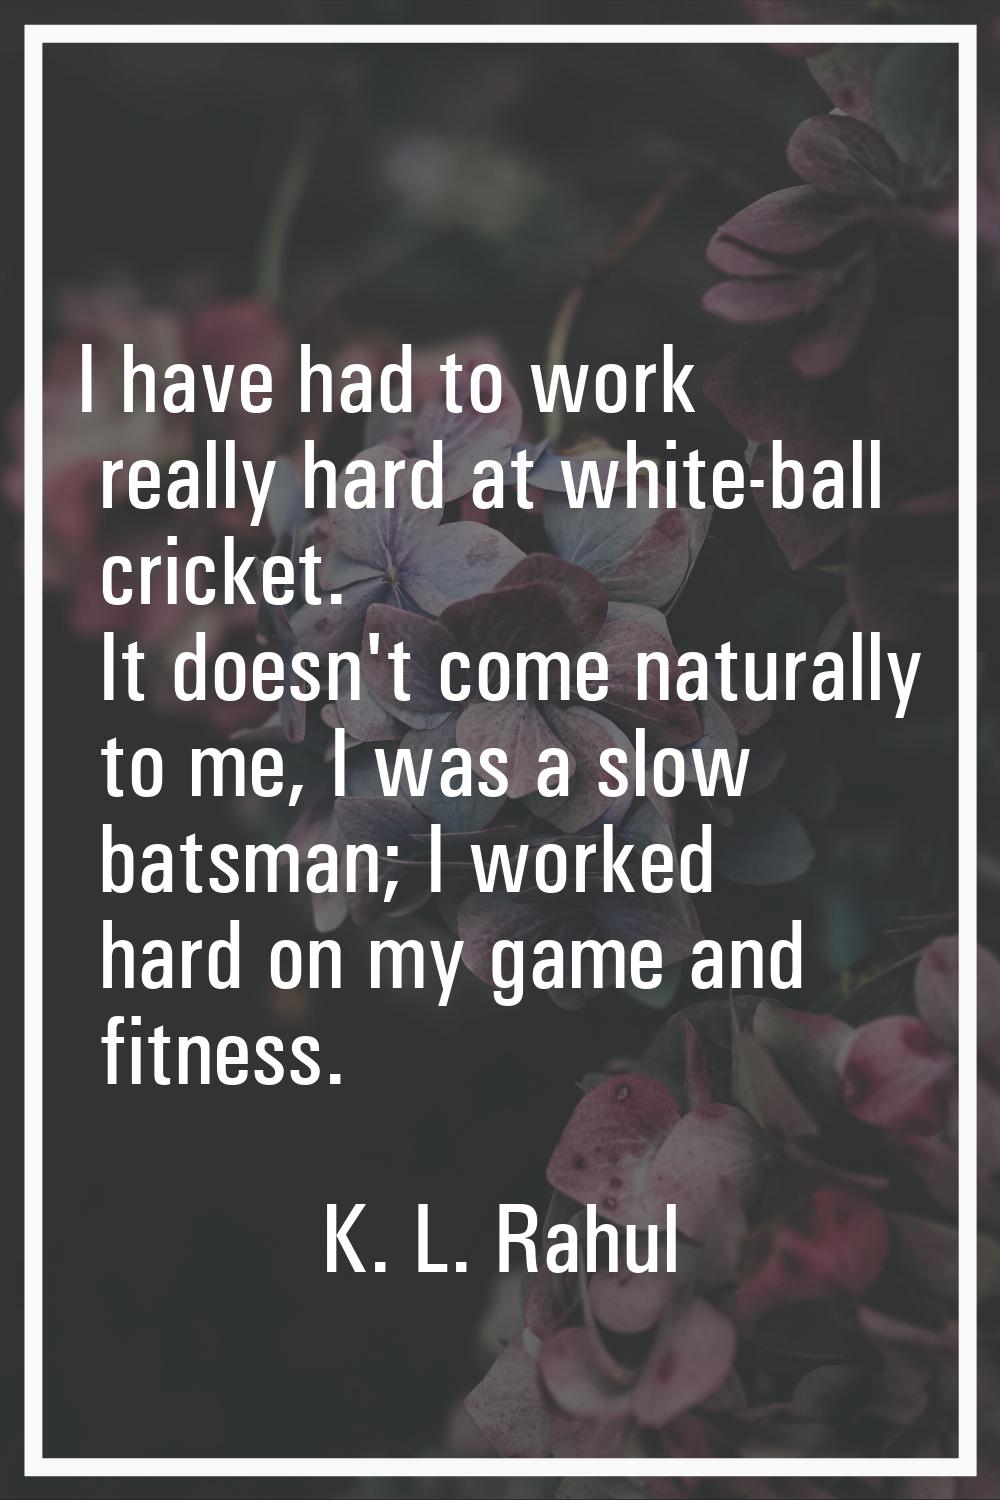 I have had to work really hard at white-ball cricket. It doesn't come naturally to me, I was a slow